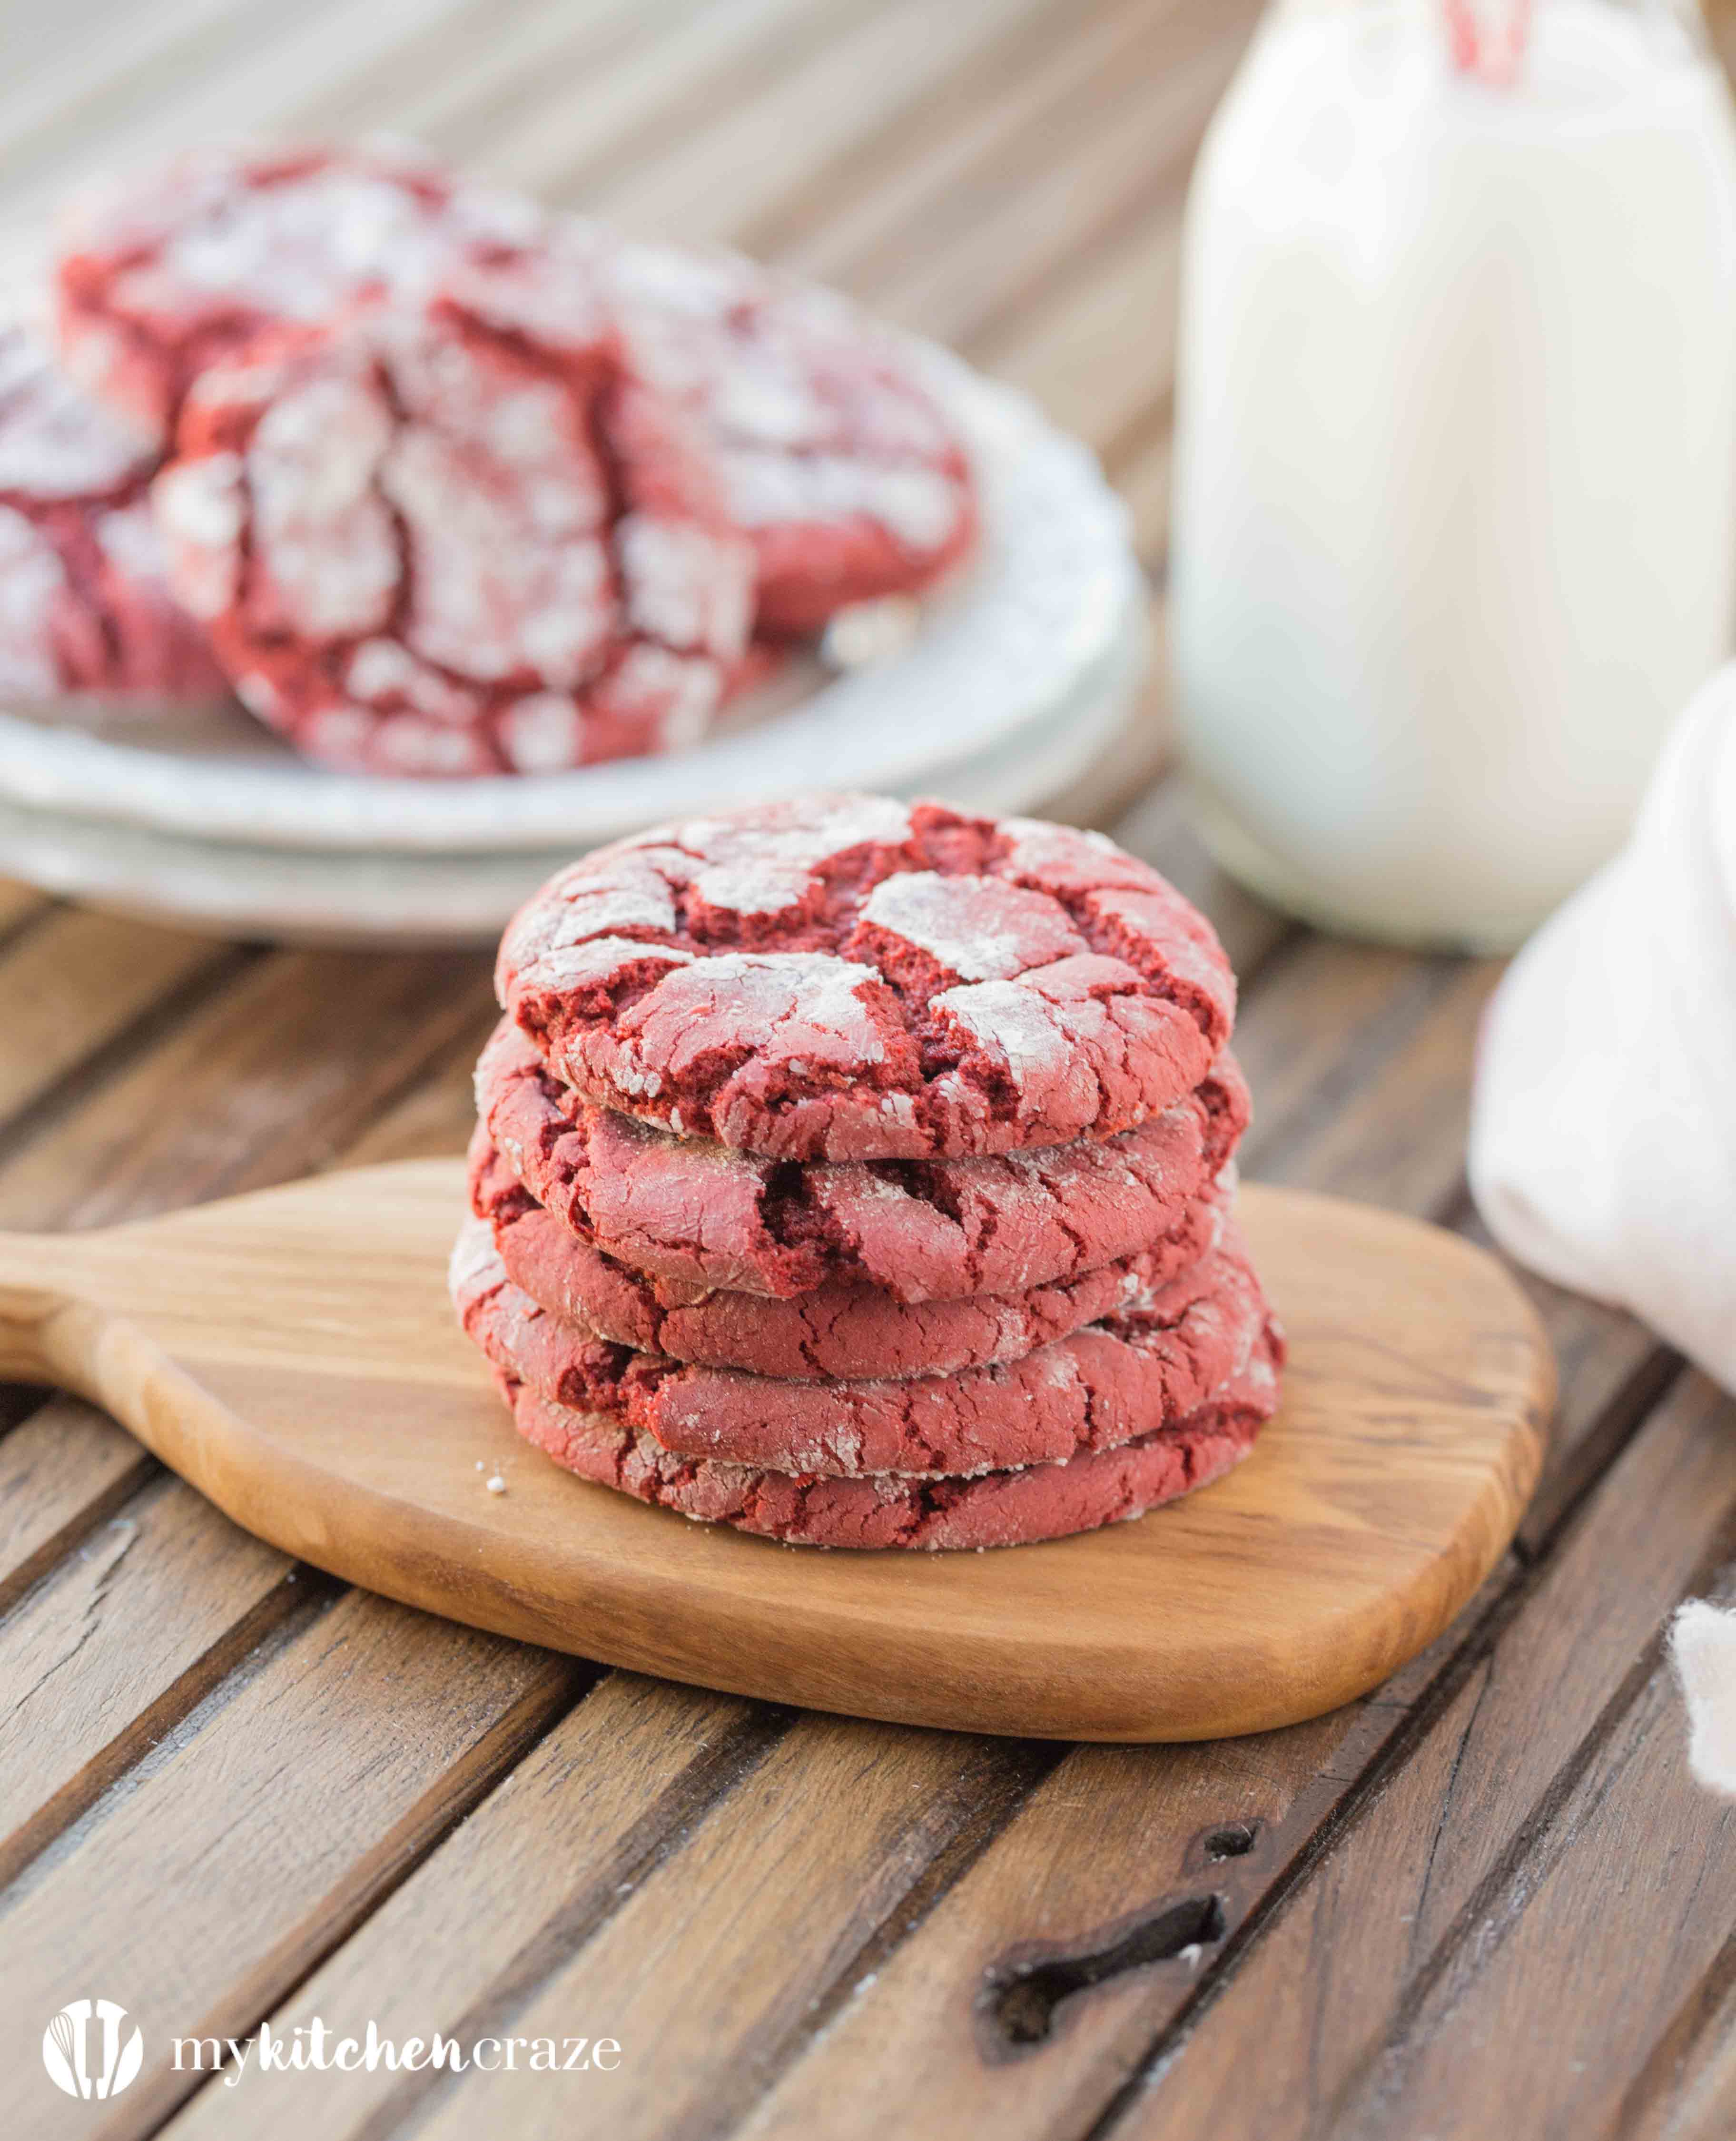 Crunchy around the edges and soft in the center, these Red Velvet Crinkle Cookies can be a great treat for Valentine's Day. You won't believe how easy and good these are!